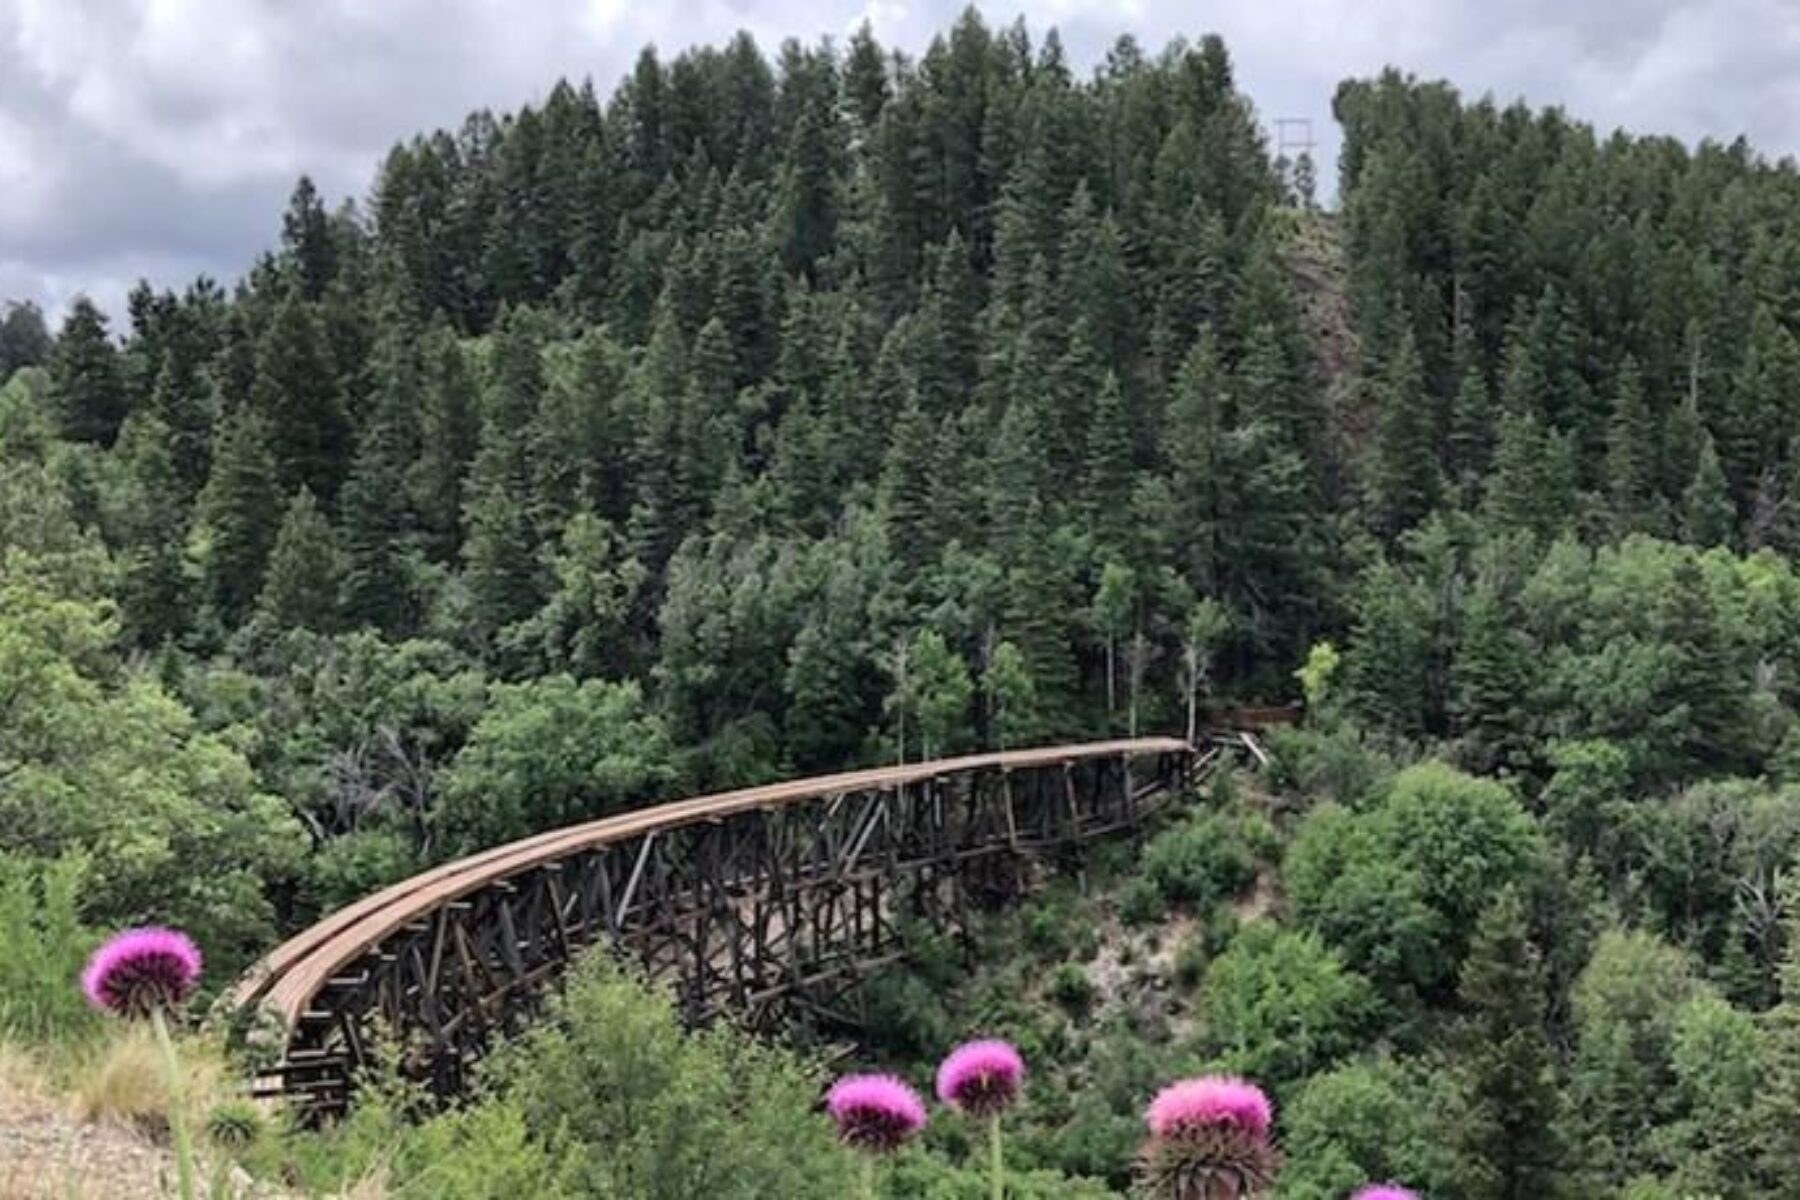 The 122-year-old Cloud-Climbing Trestle, also known as the Mexican Canyon Trestle | Photo by Cindy Barks